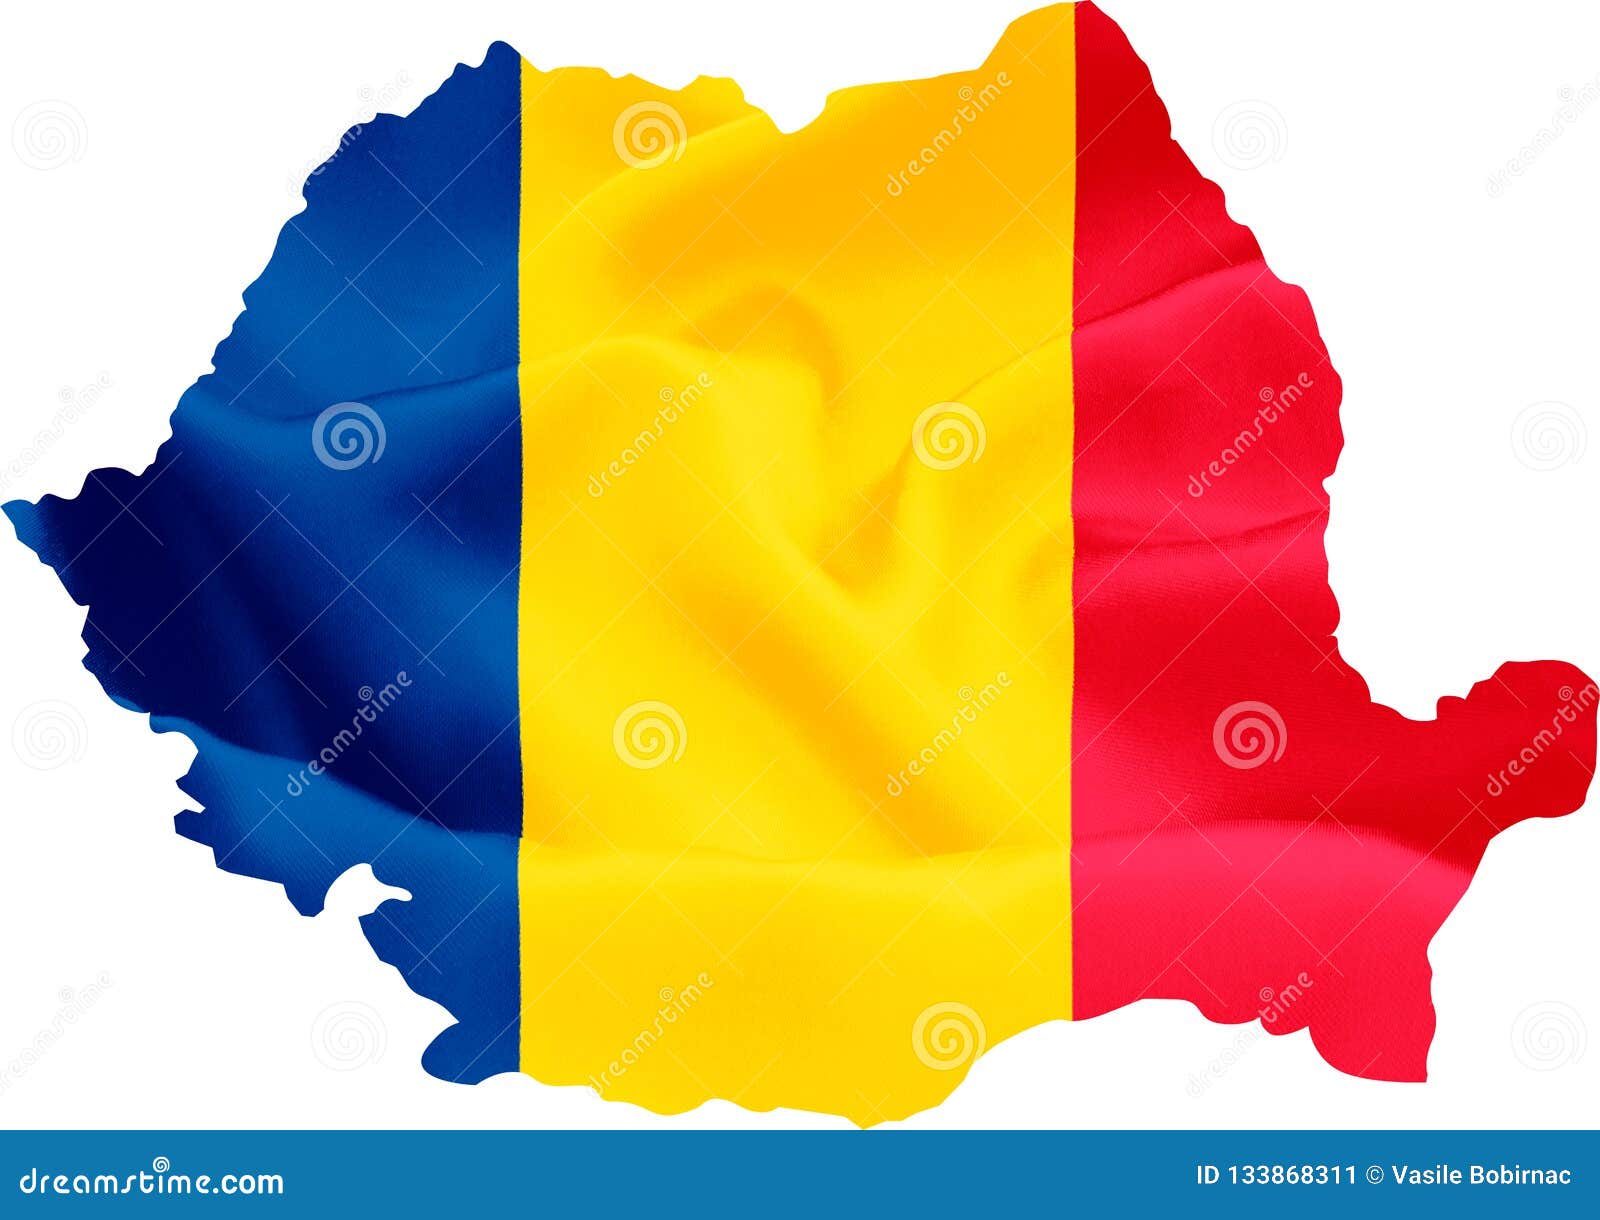 romania map with flag